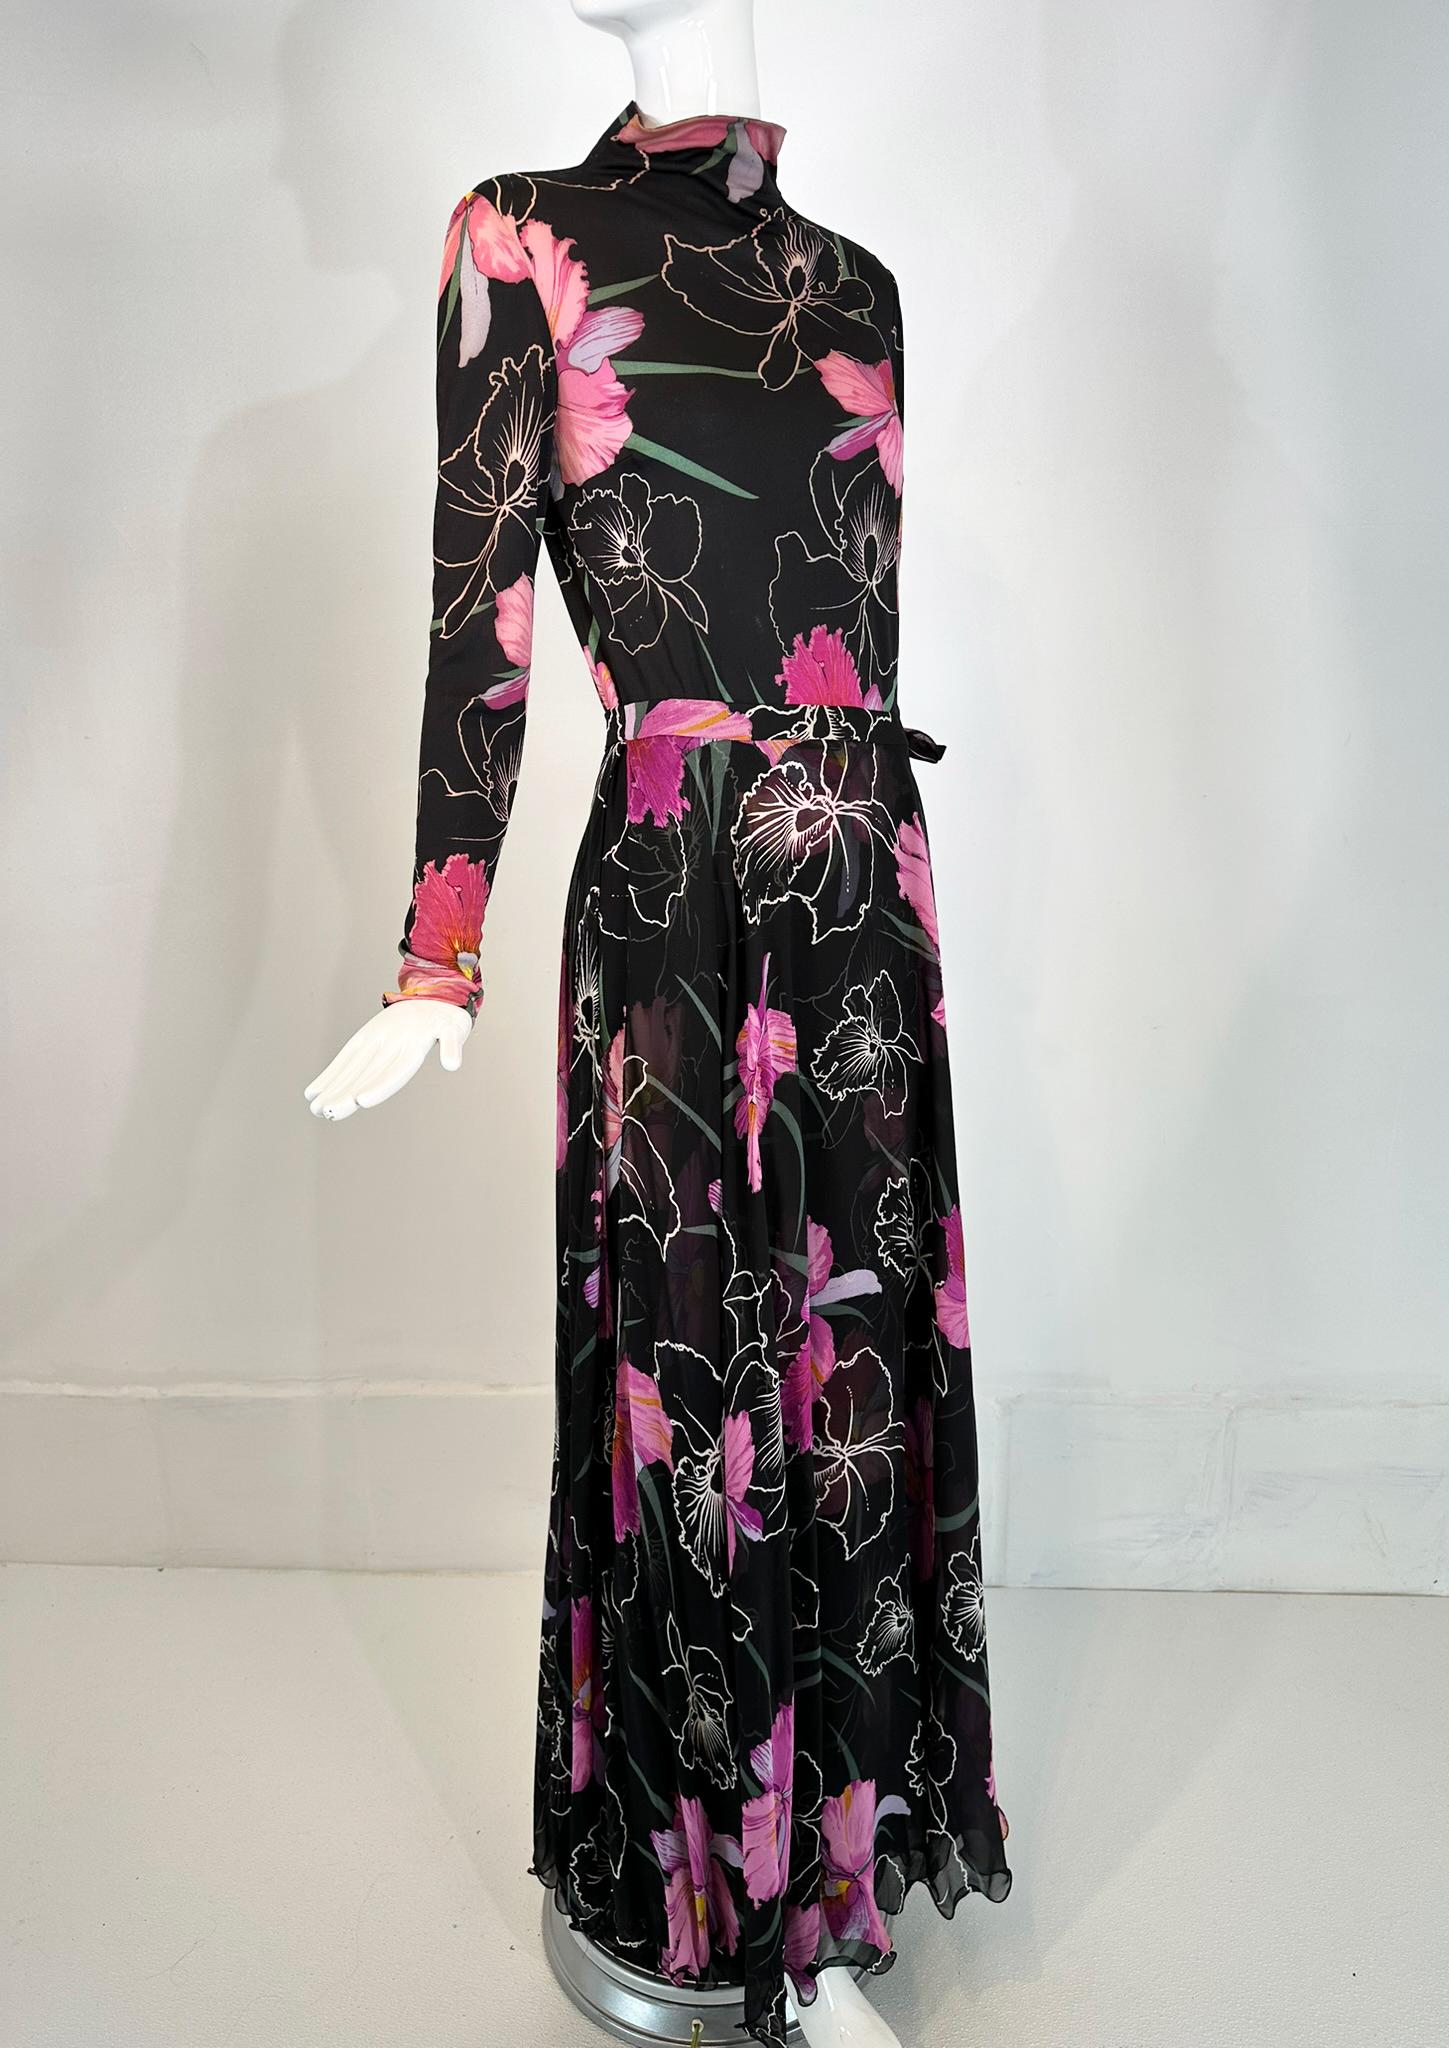 La Mendola 2pc orchid print jersey maxi dress & silk chiffon over skirt from the 1960s. Floral print of large orchid flowers with white outline orchid flowers on a black ground. Mock neck dress has long sleeves, the dress has bust darts. Body